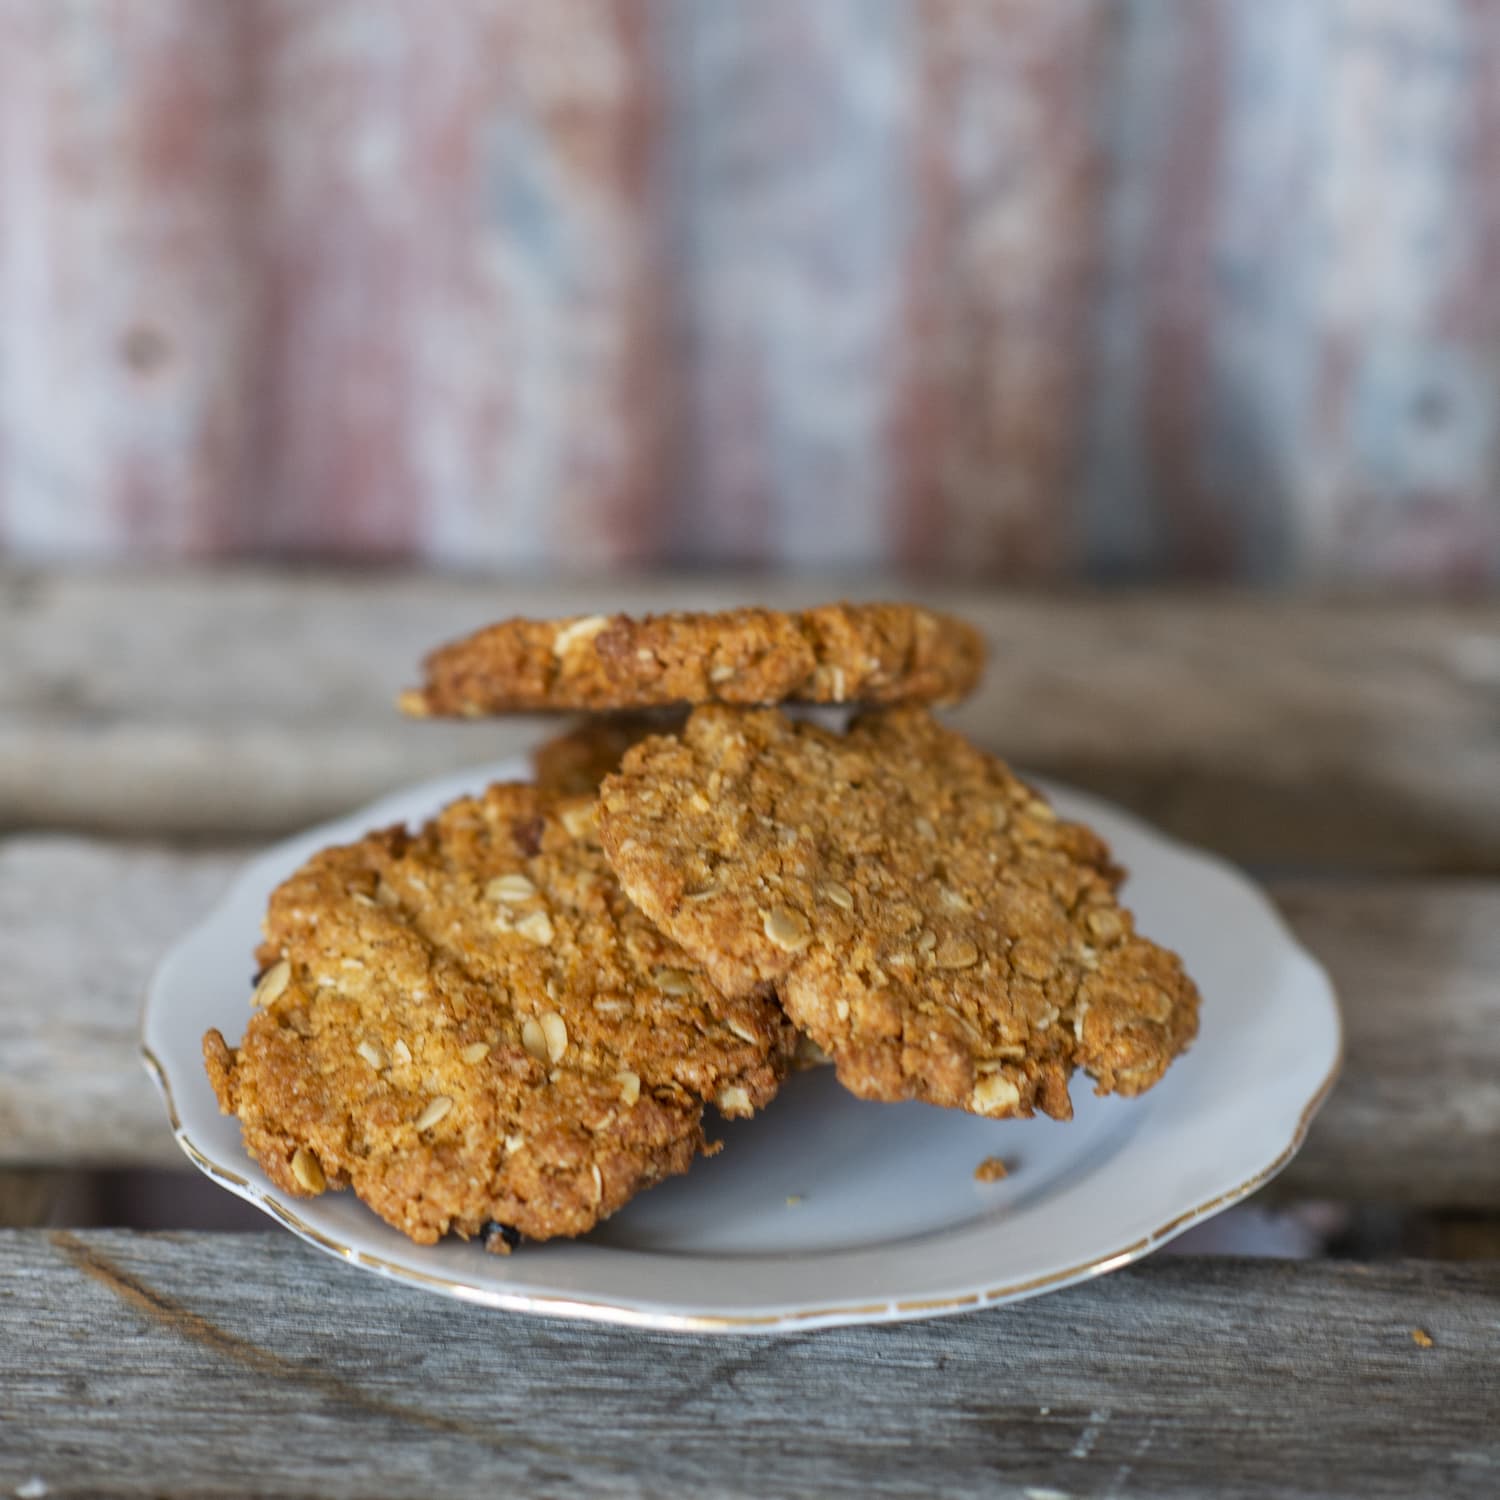 A plate of Anzac biscuits